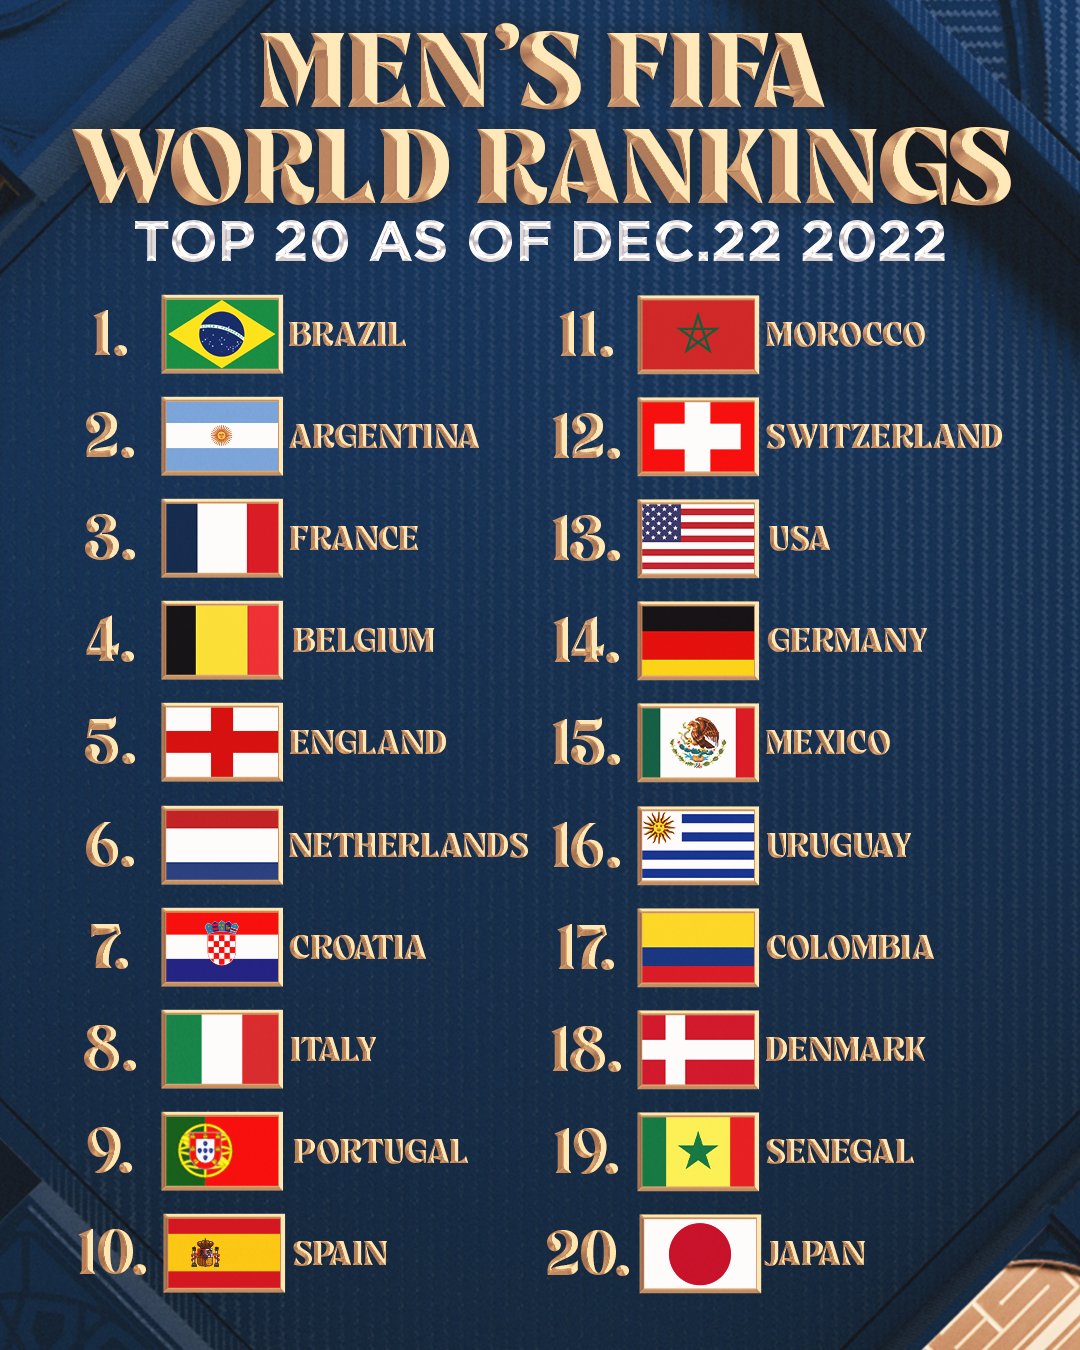 FOX Soccer on X: The latest Men's FIFA World Rankings have